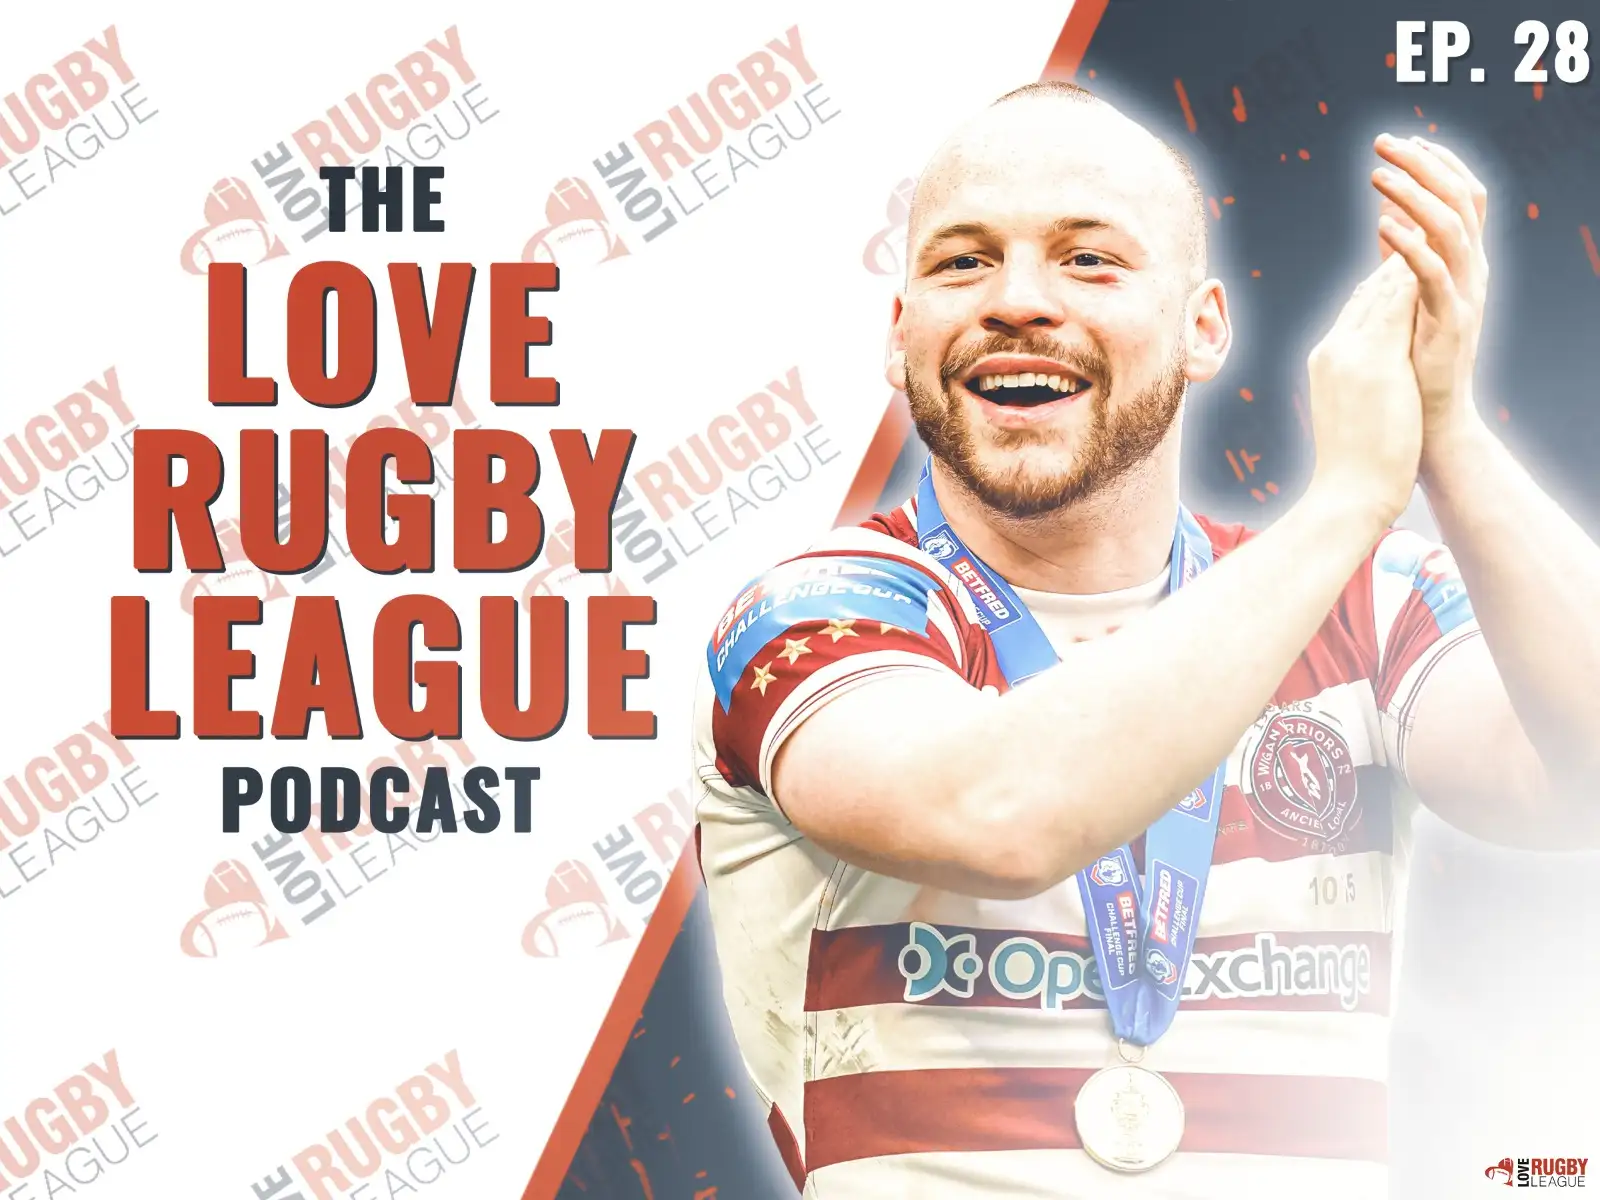 Podcast: Liam Marshall on almost giving up on rugby league, England hopes & Peet’s Wigan transformation